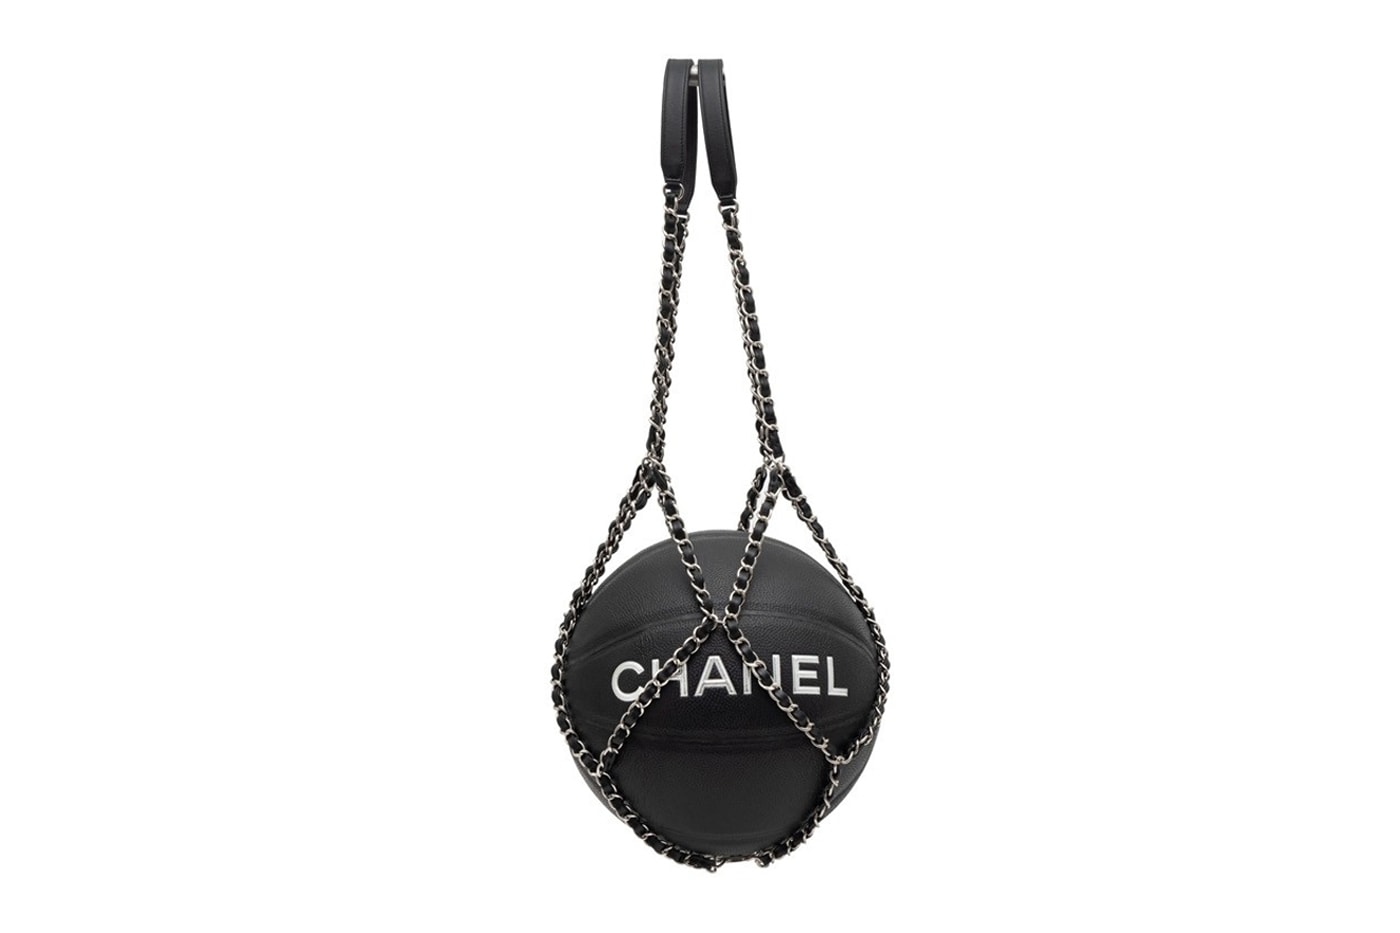 Chanel Surfboard and Basketball Holder Release Information Justin reed accessories Philippe Barland